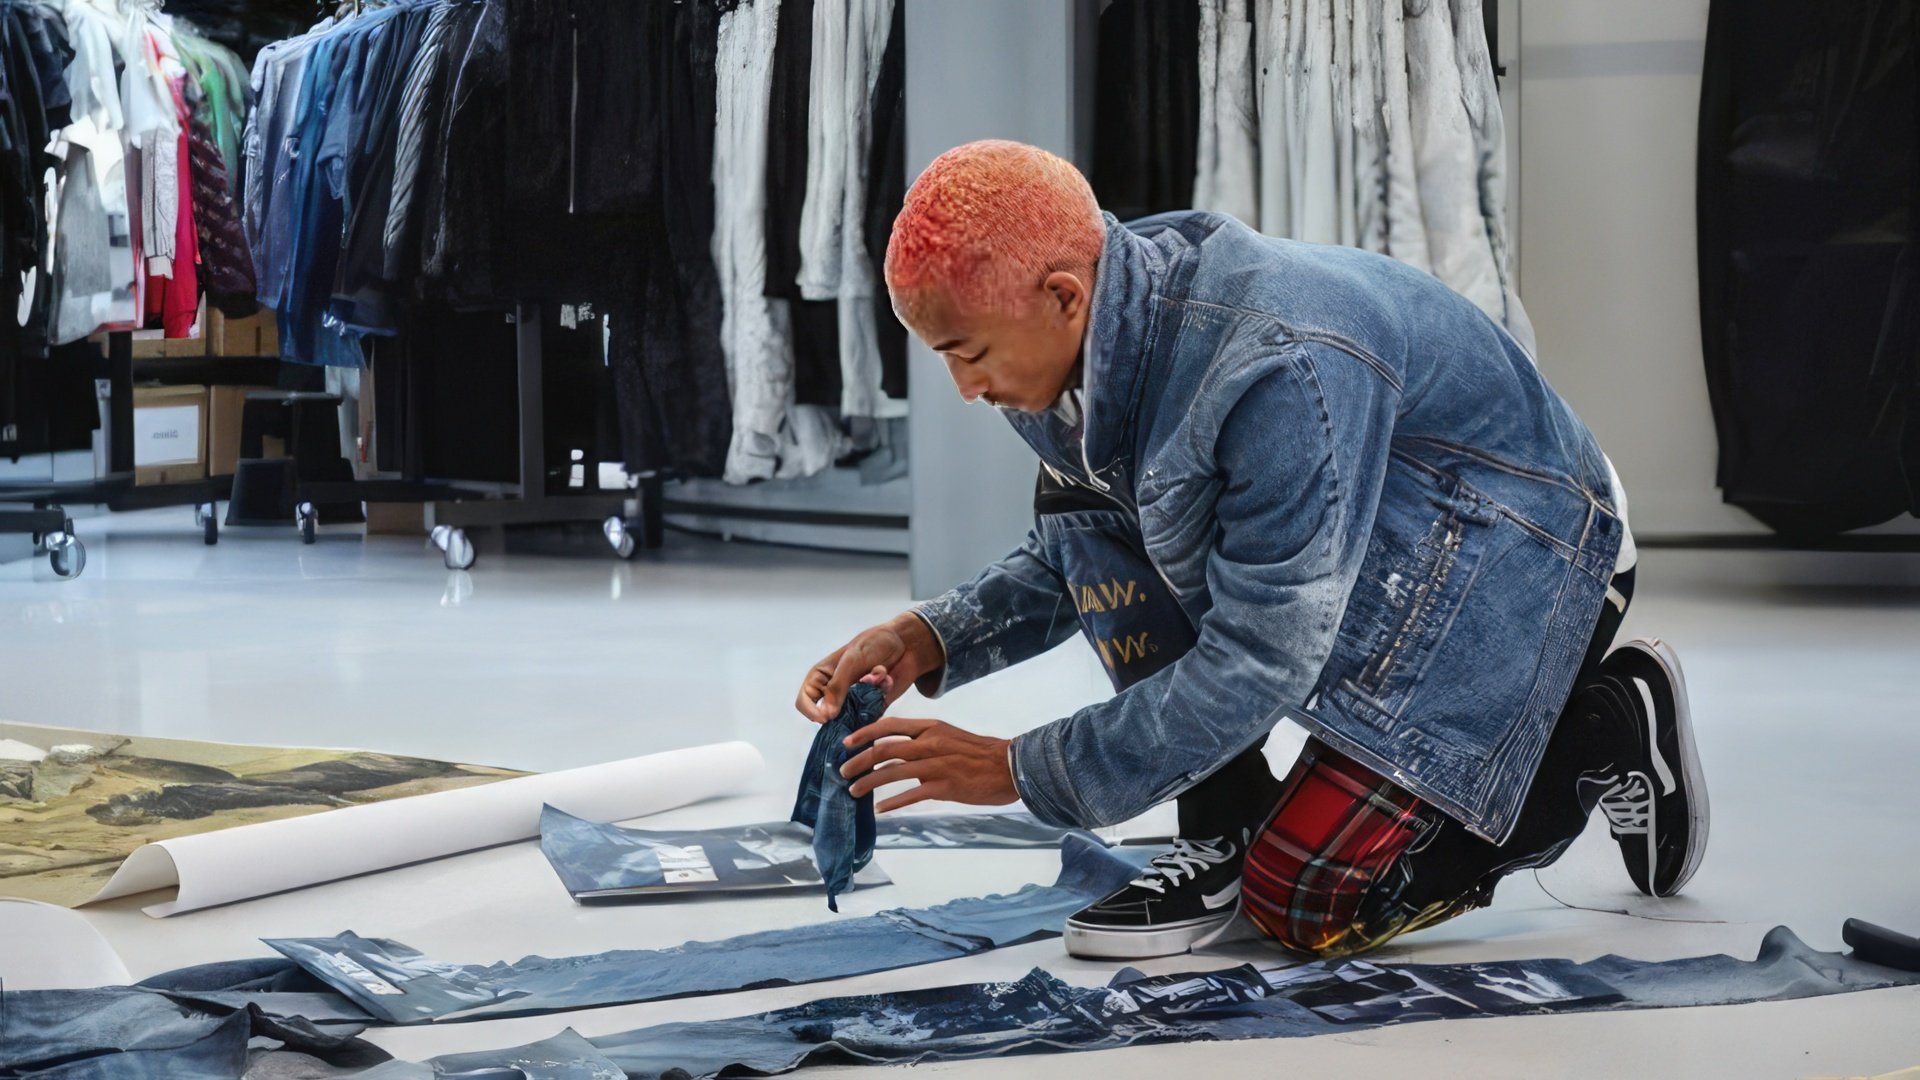 Jaden Smith launched a denim clothing line in collaboration with the fashion brand G-Star